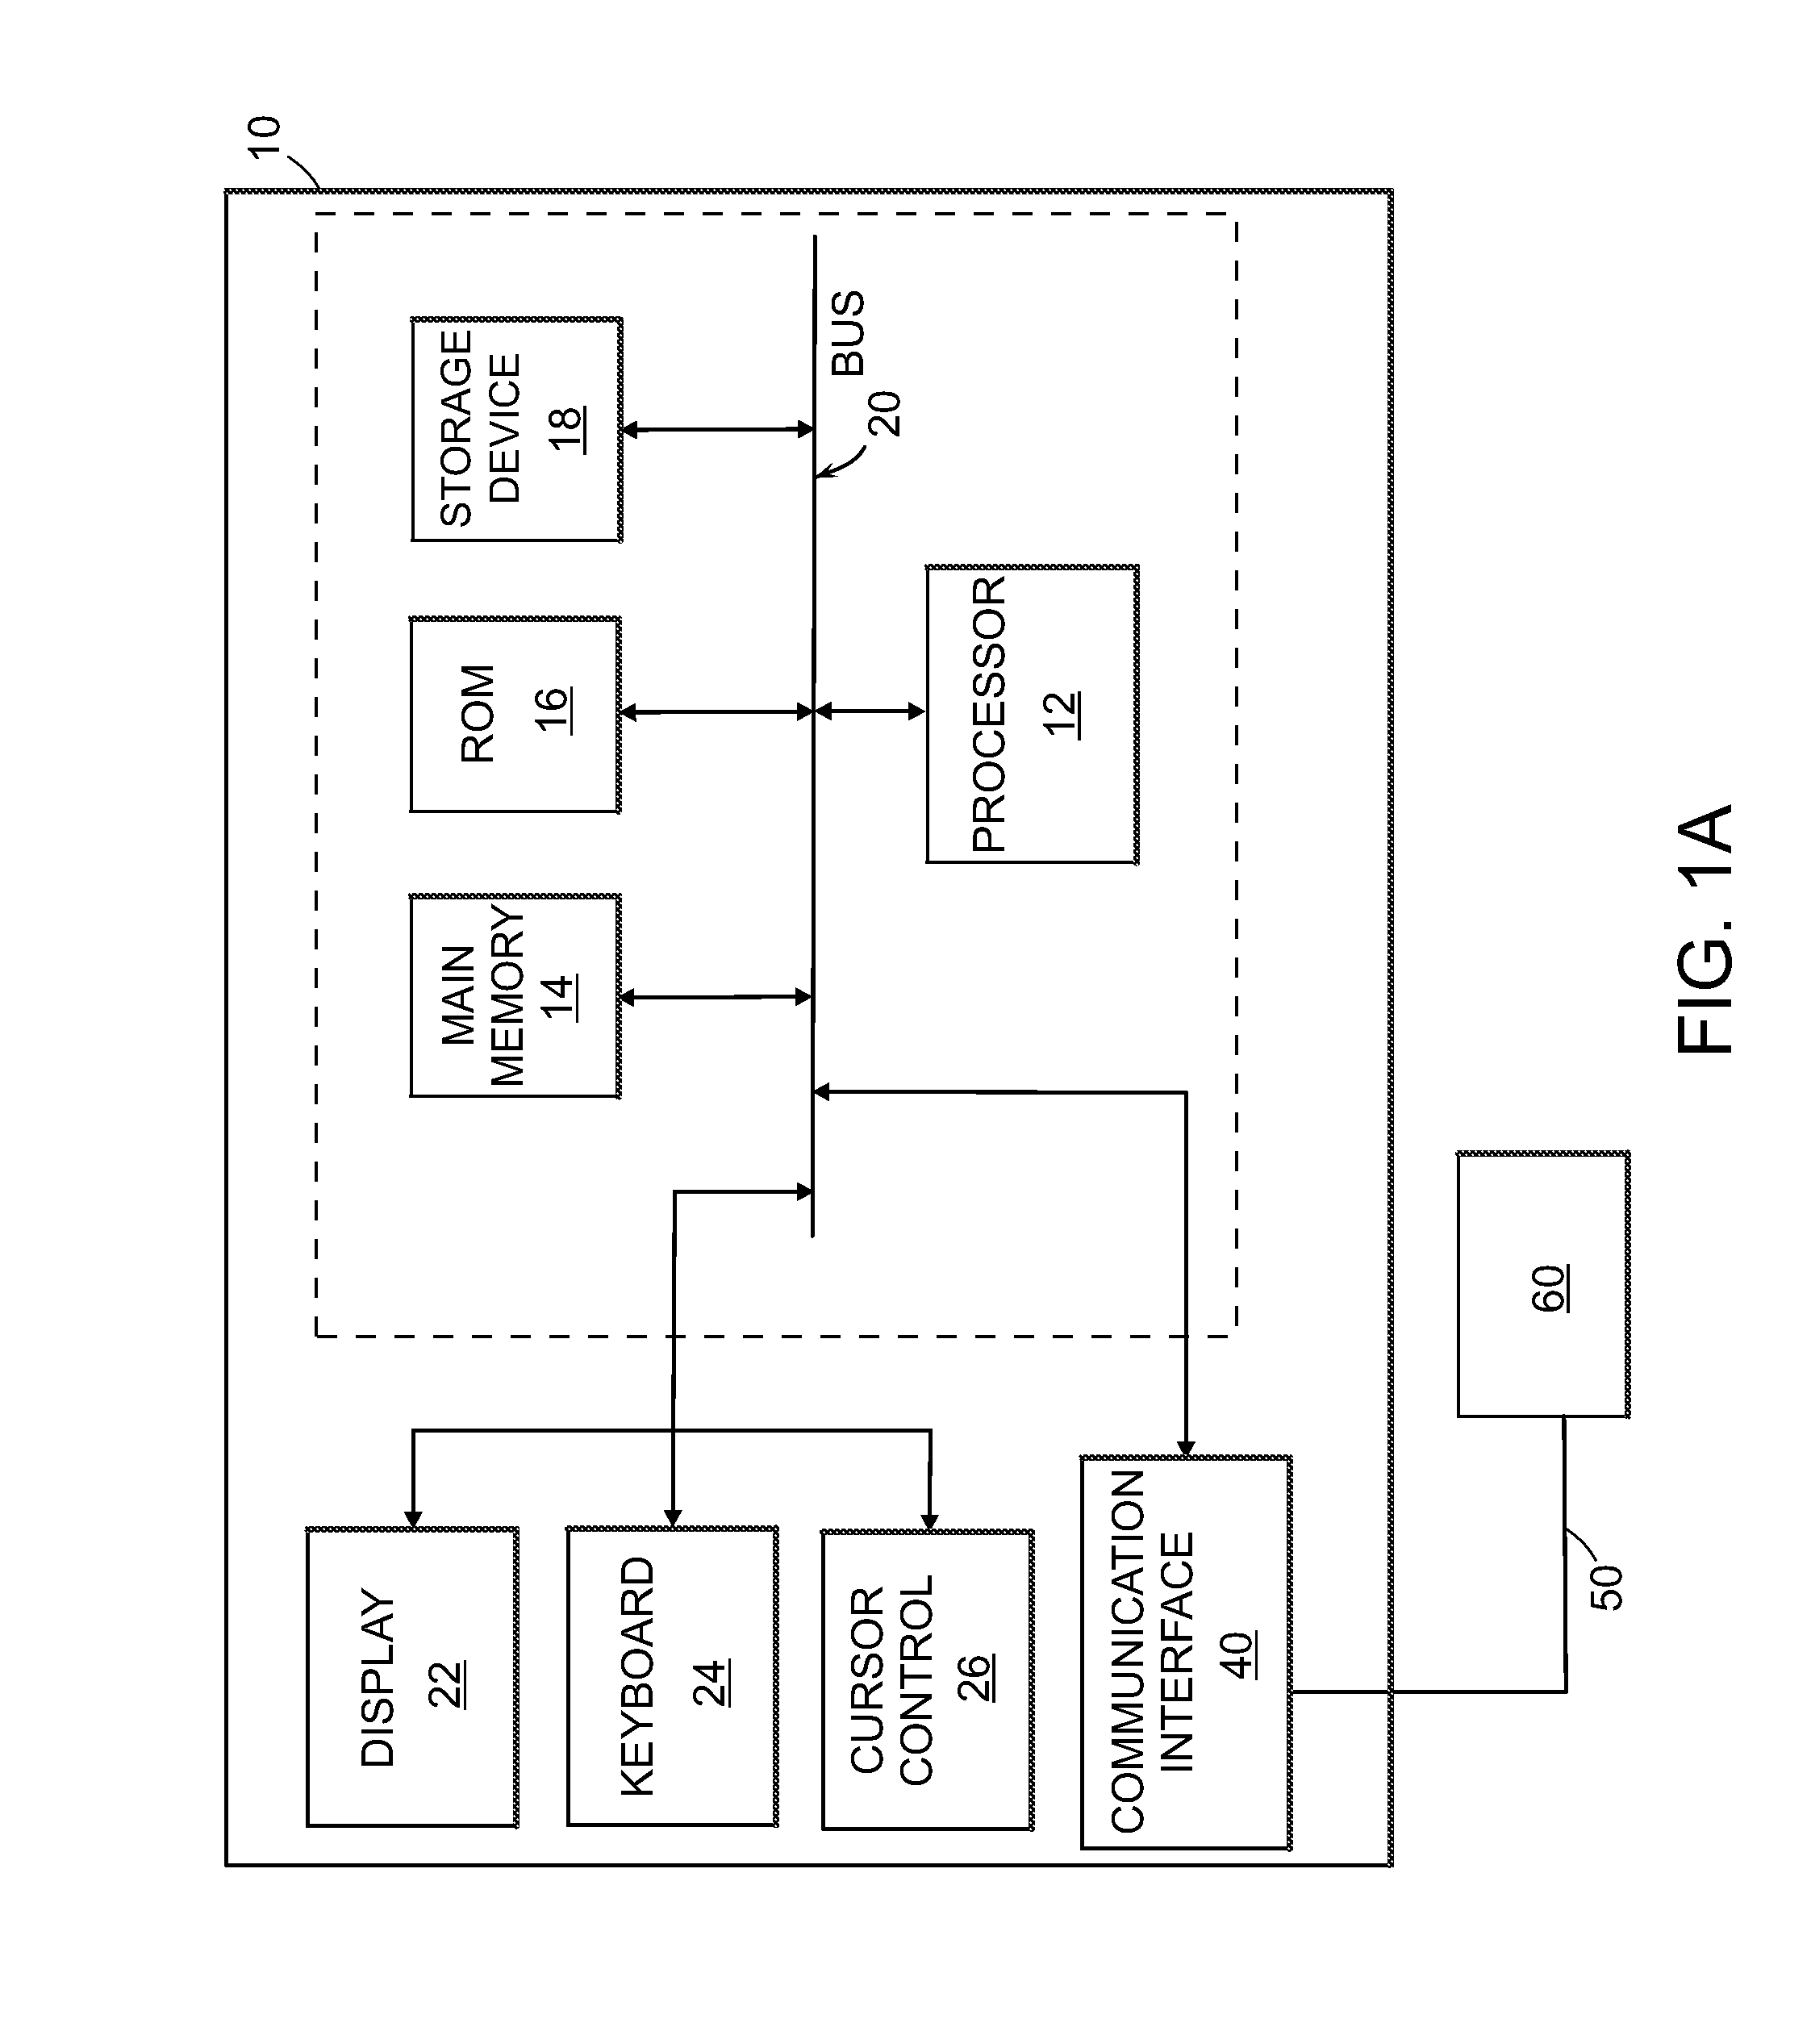 Systems and methods for parameter adaptation